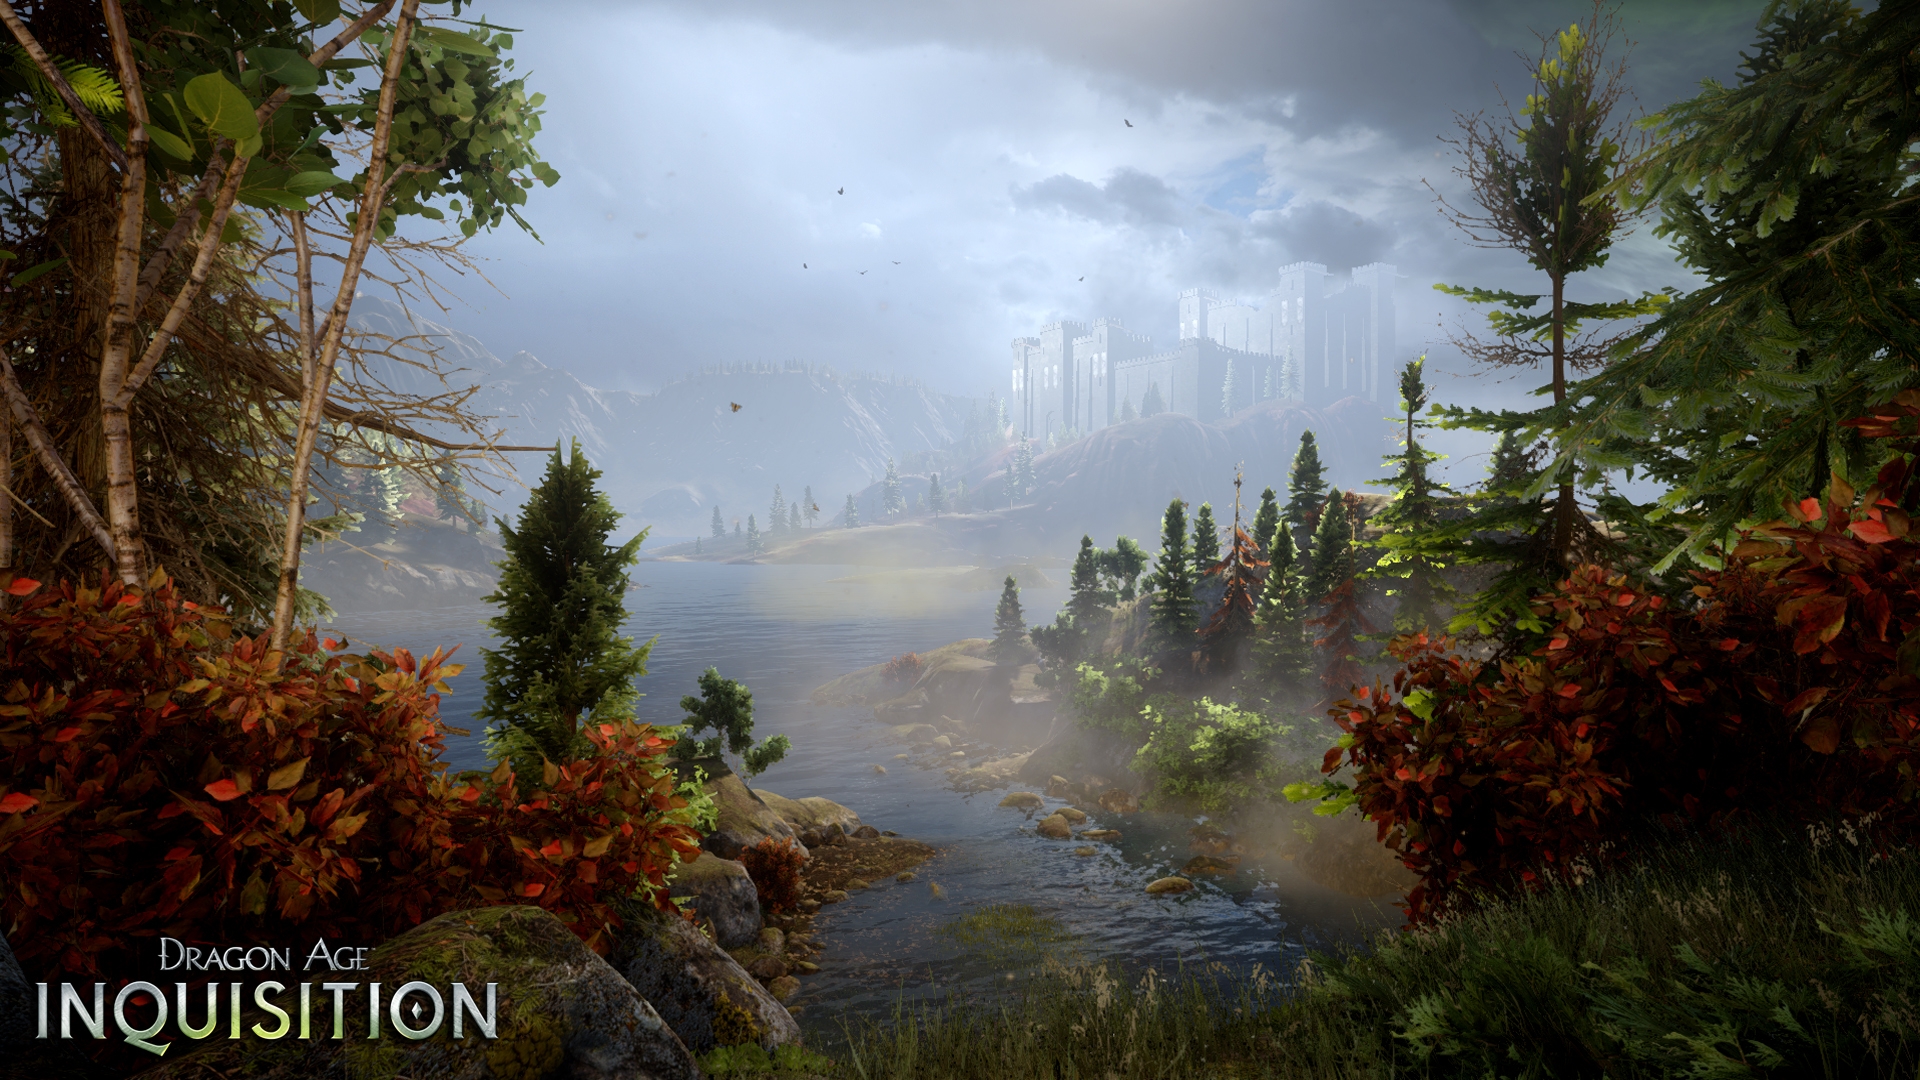  the Collection Dragon Age Video Game Dragon Age Inquisition 535462 1920x1080